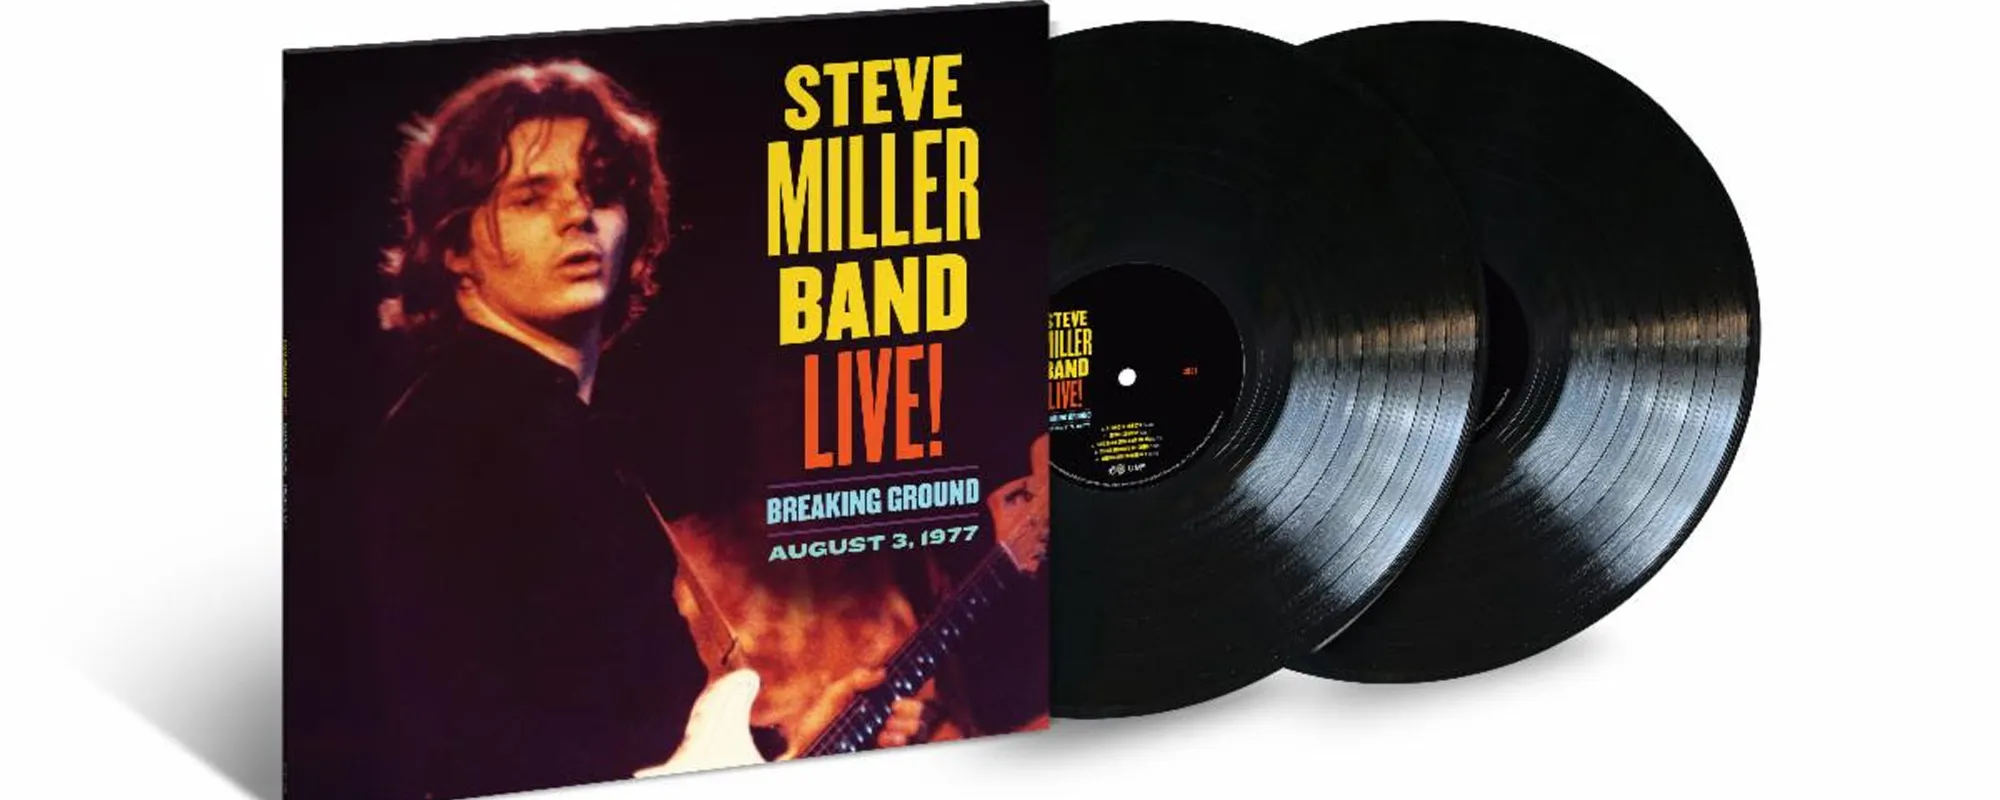 Review: A Classic Live Album From the Steve Miller Band Offers Opportunity to Witness the Eagle Taking Flight